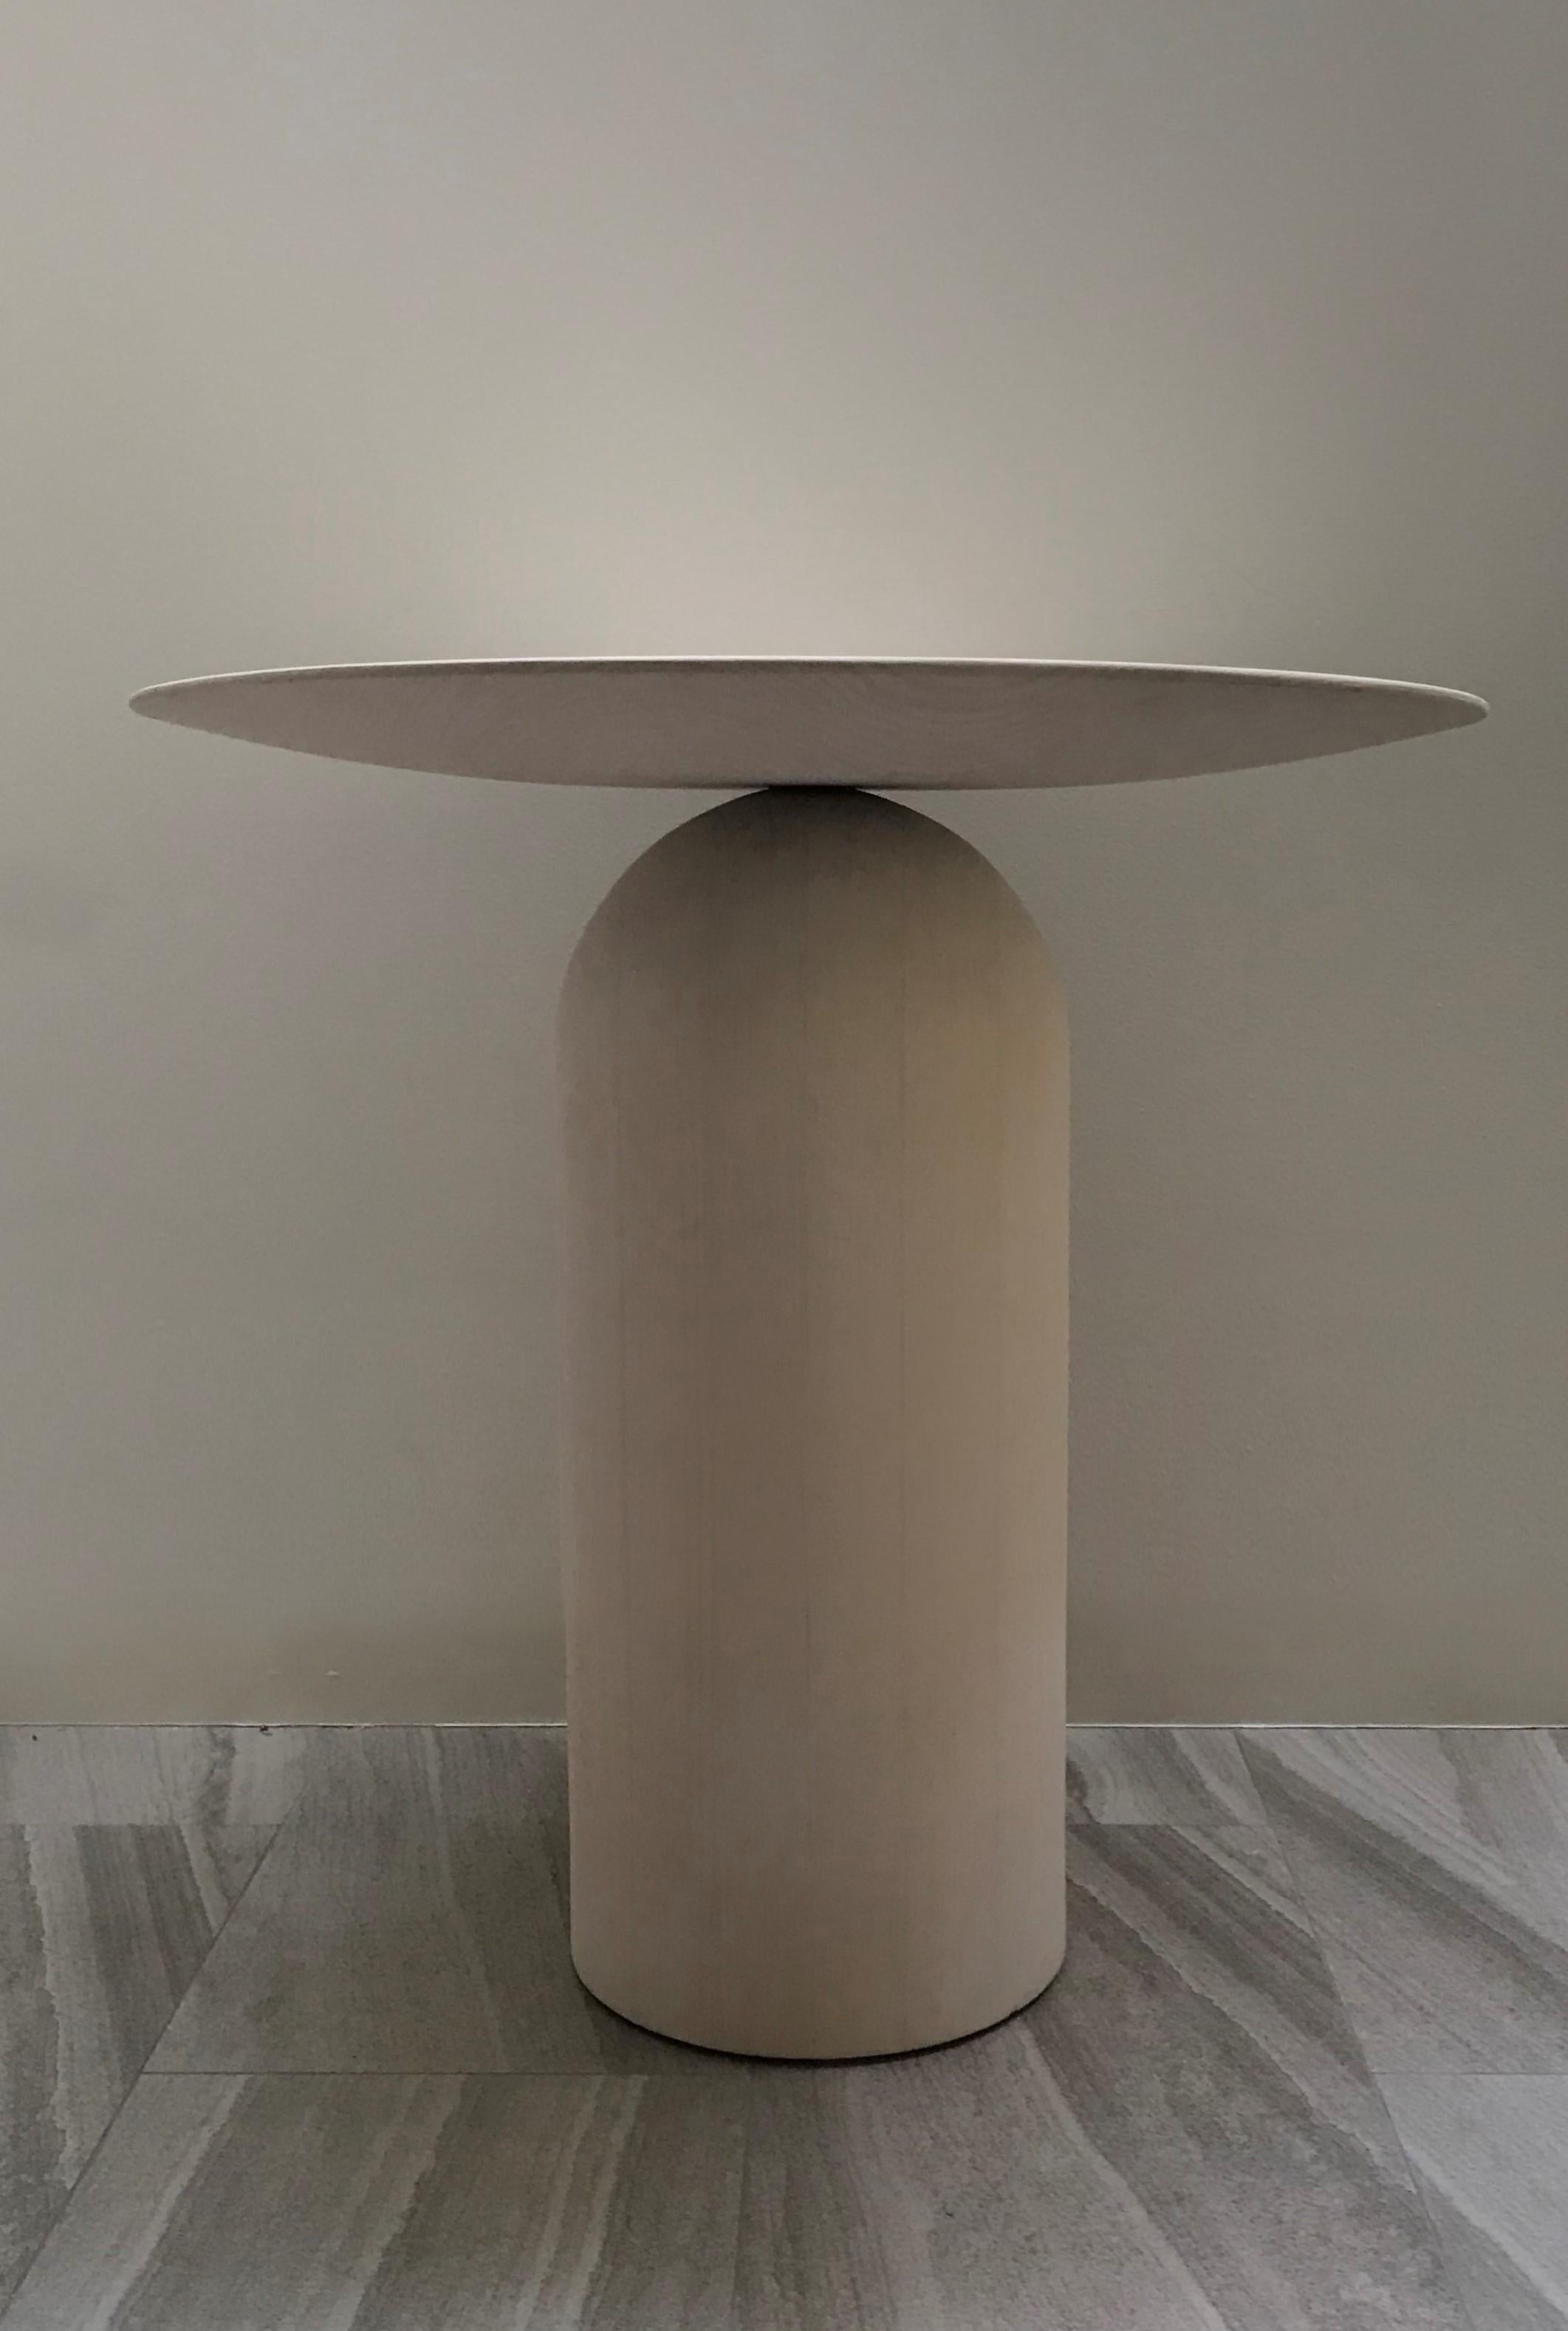 Inspired by 20th century sculptors, Arp and Brancusi, this artisanal table works equally well in modern or classical interiors. The size shown can be used as a hall table, center table, bedside or coffee tables. EGG tables are truly artisanl, made